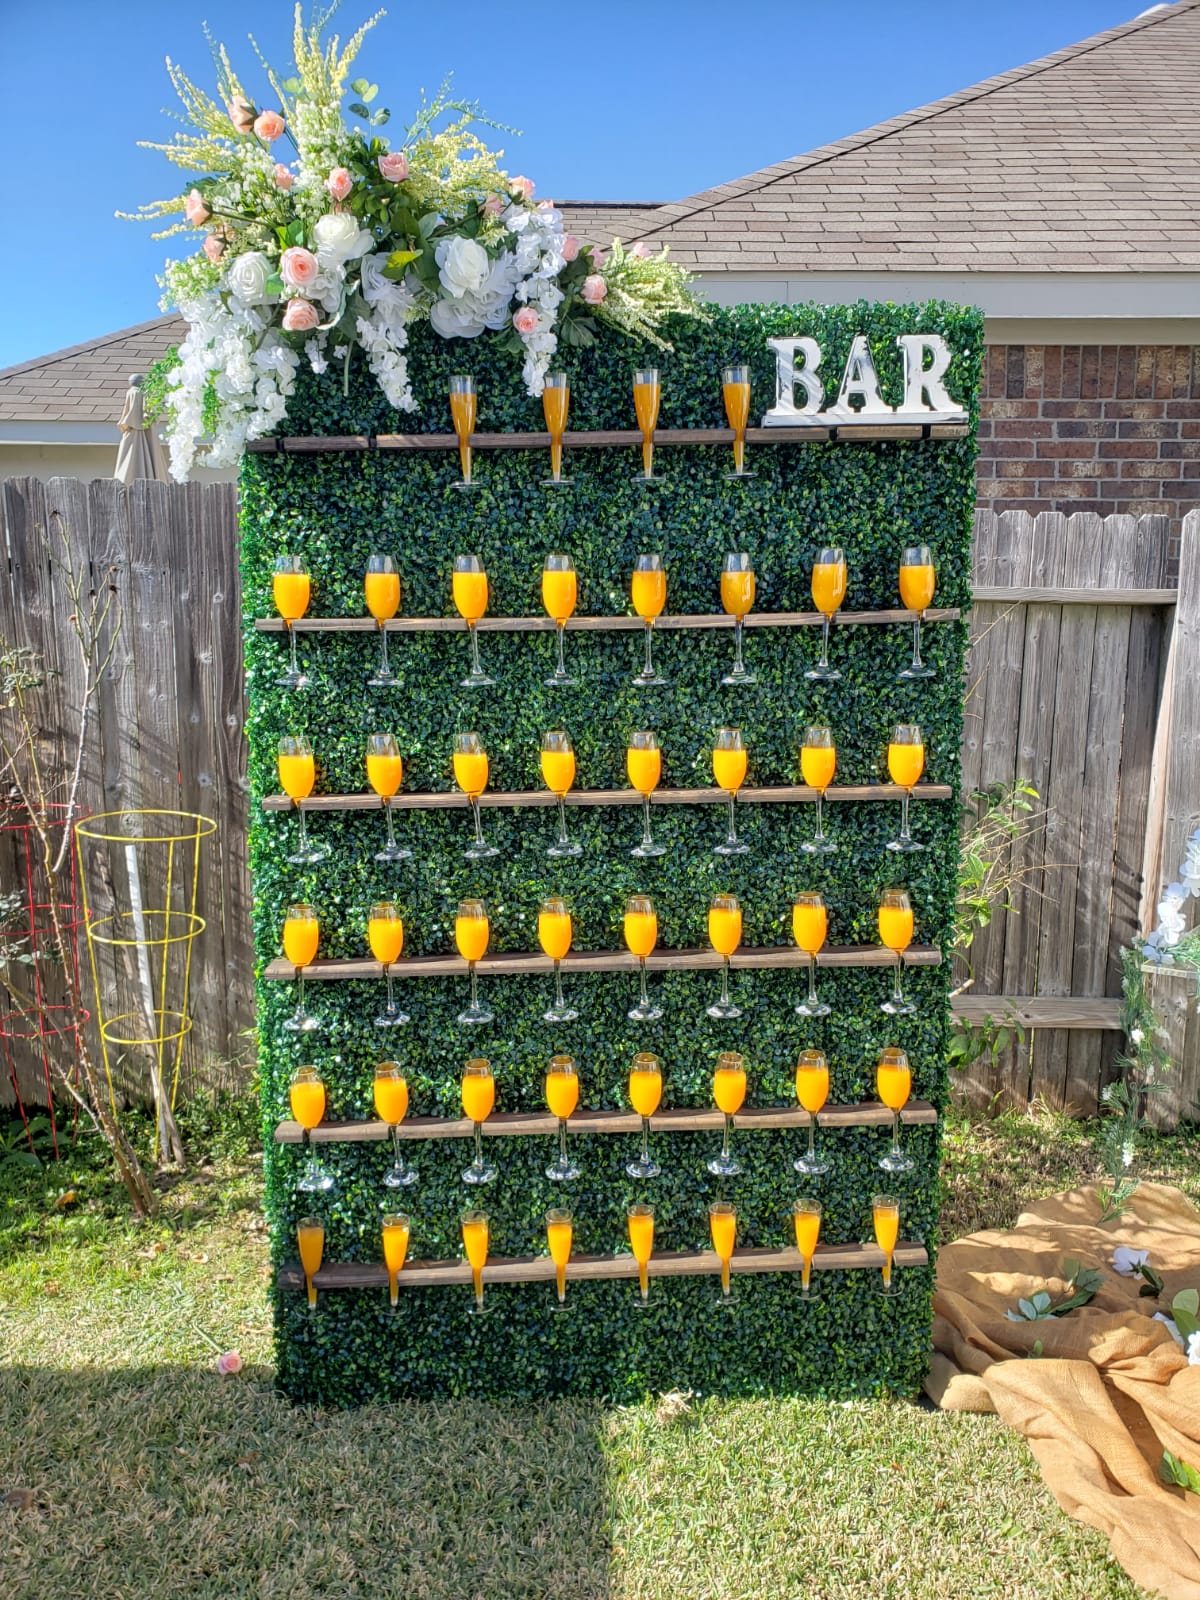 Champagne wall prop rental